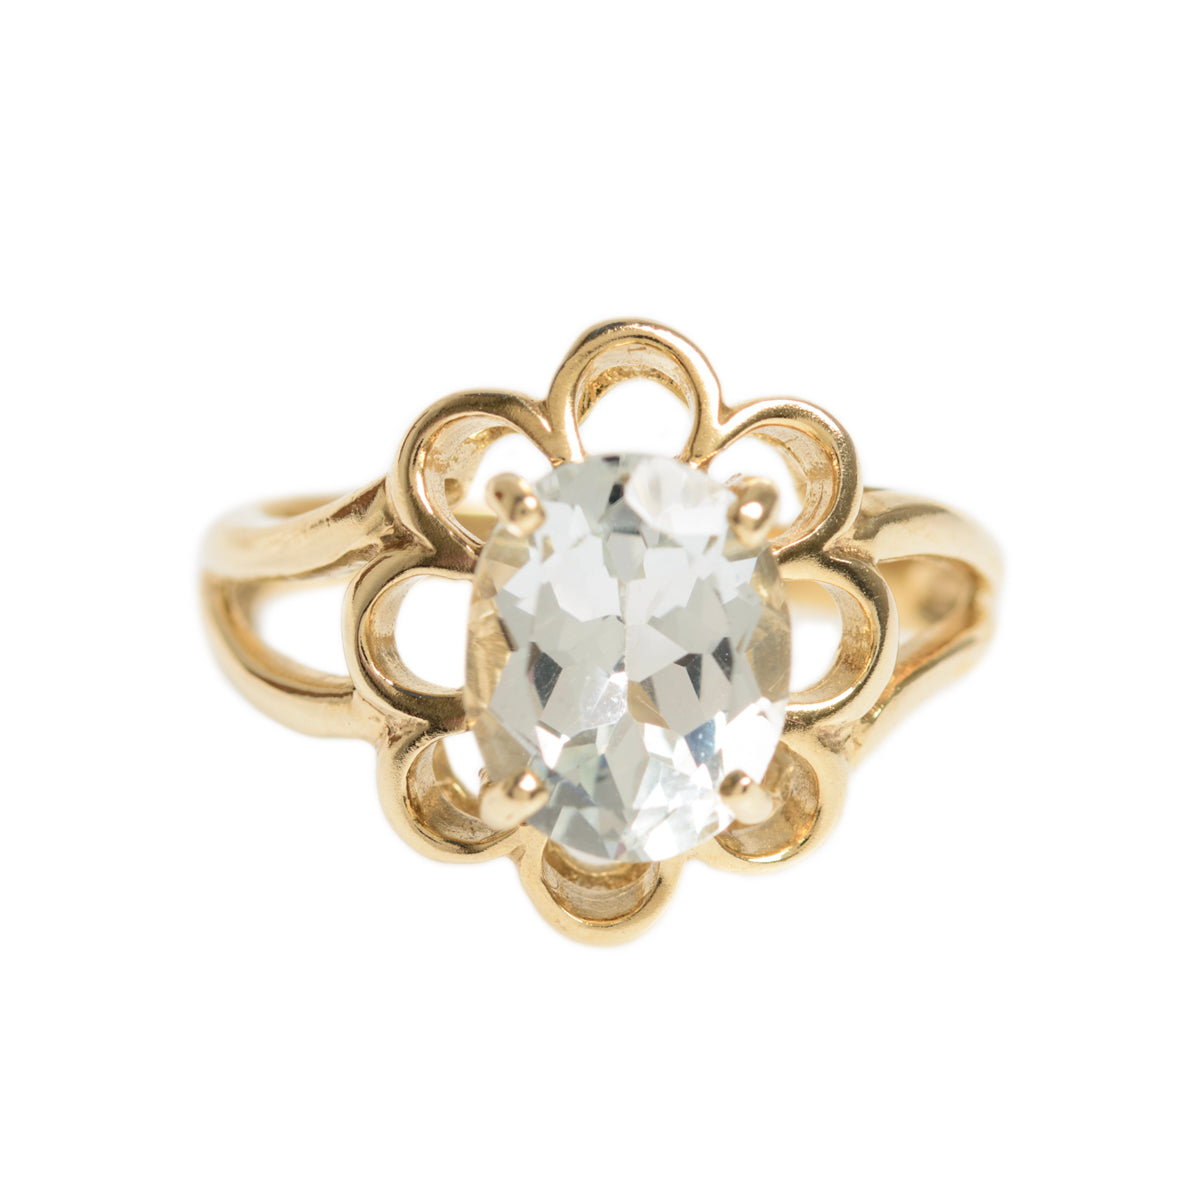 9ct Gold Ladies Dress Ring With 2.4 Carat Aquamarine In Petal Mount Size N  (A1427)